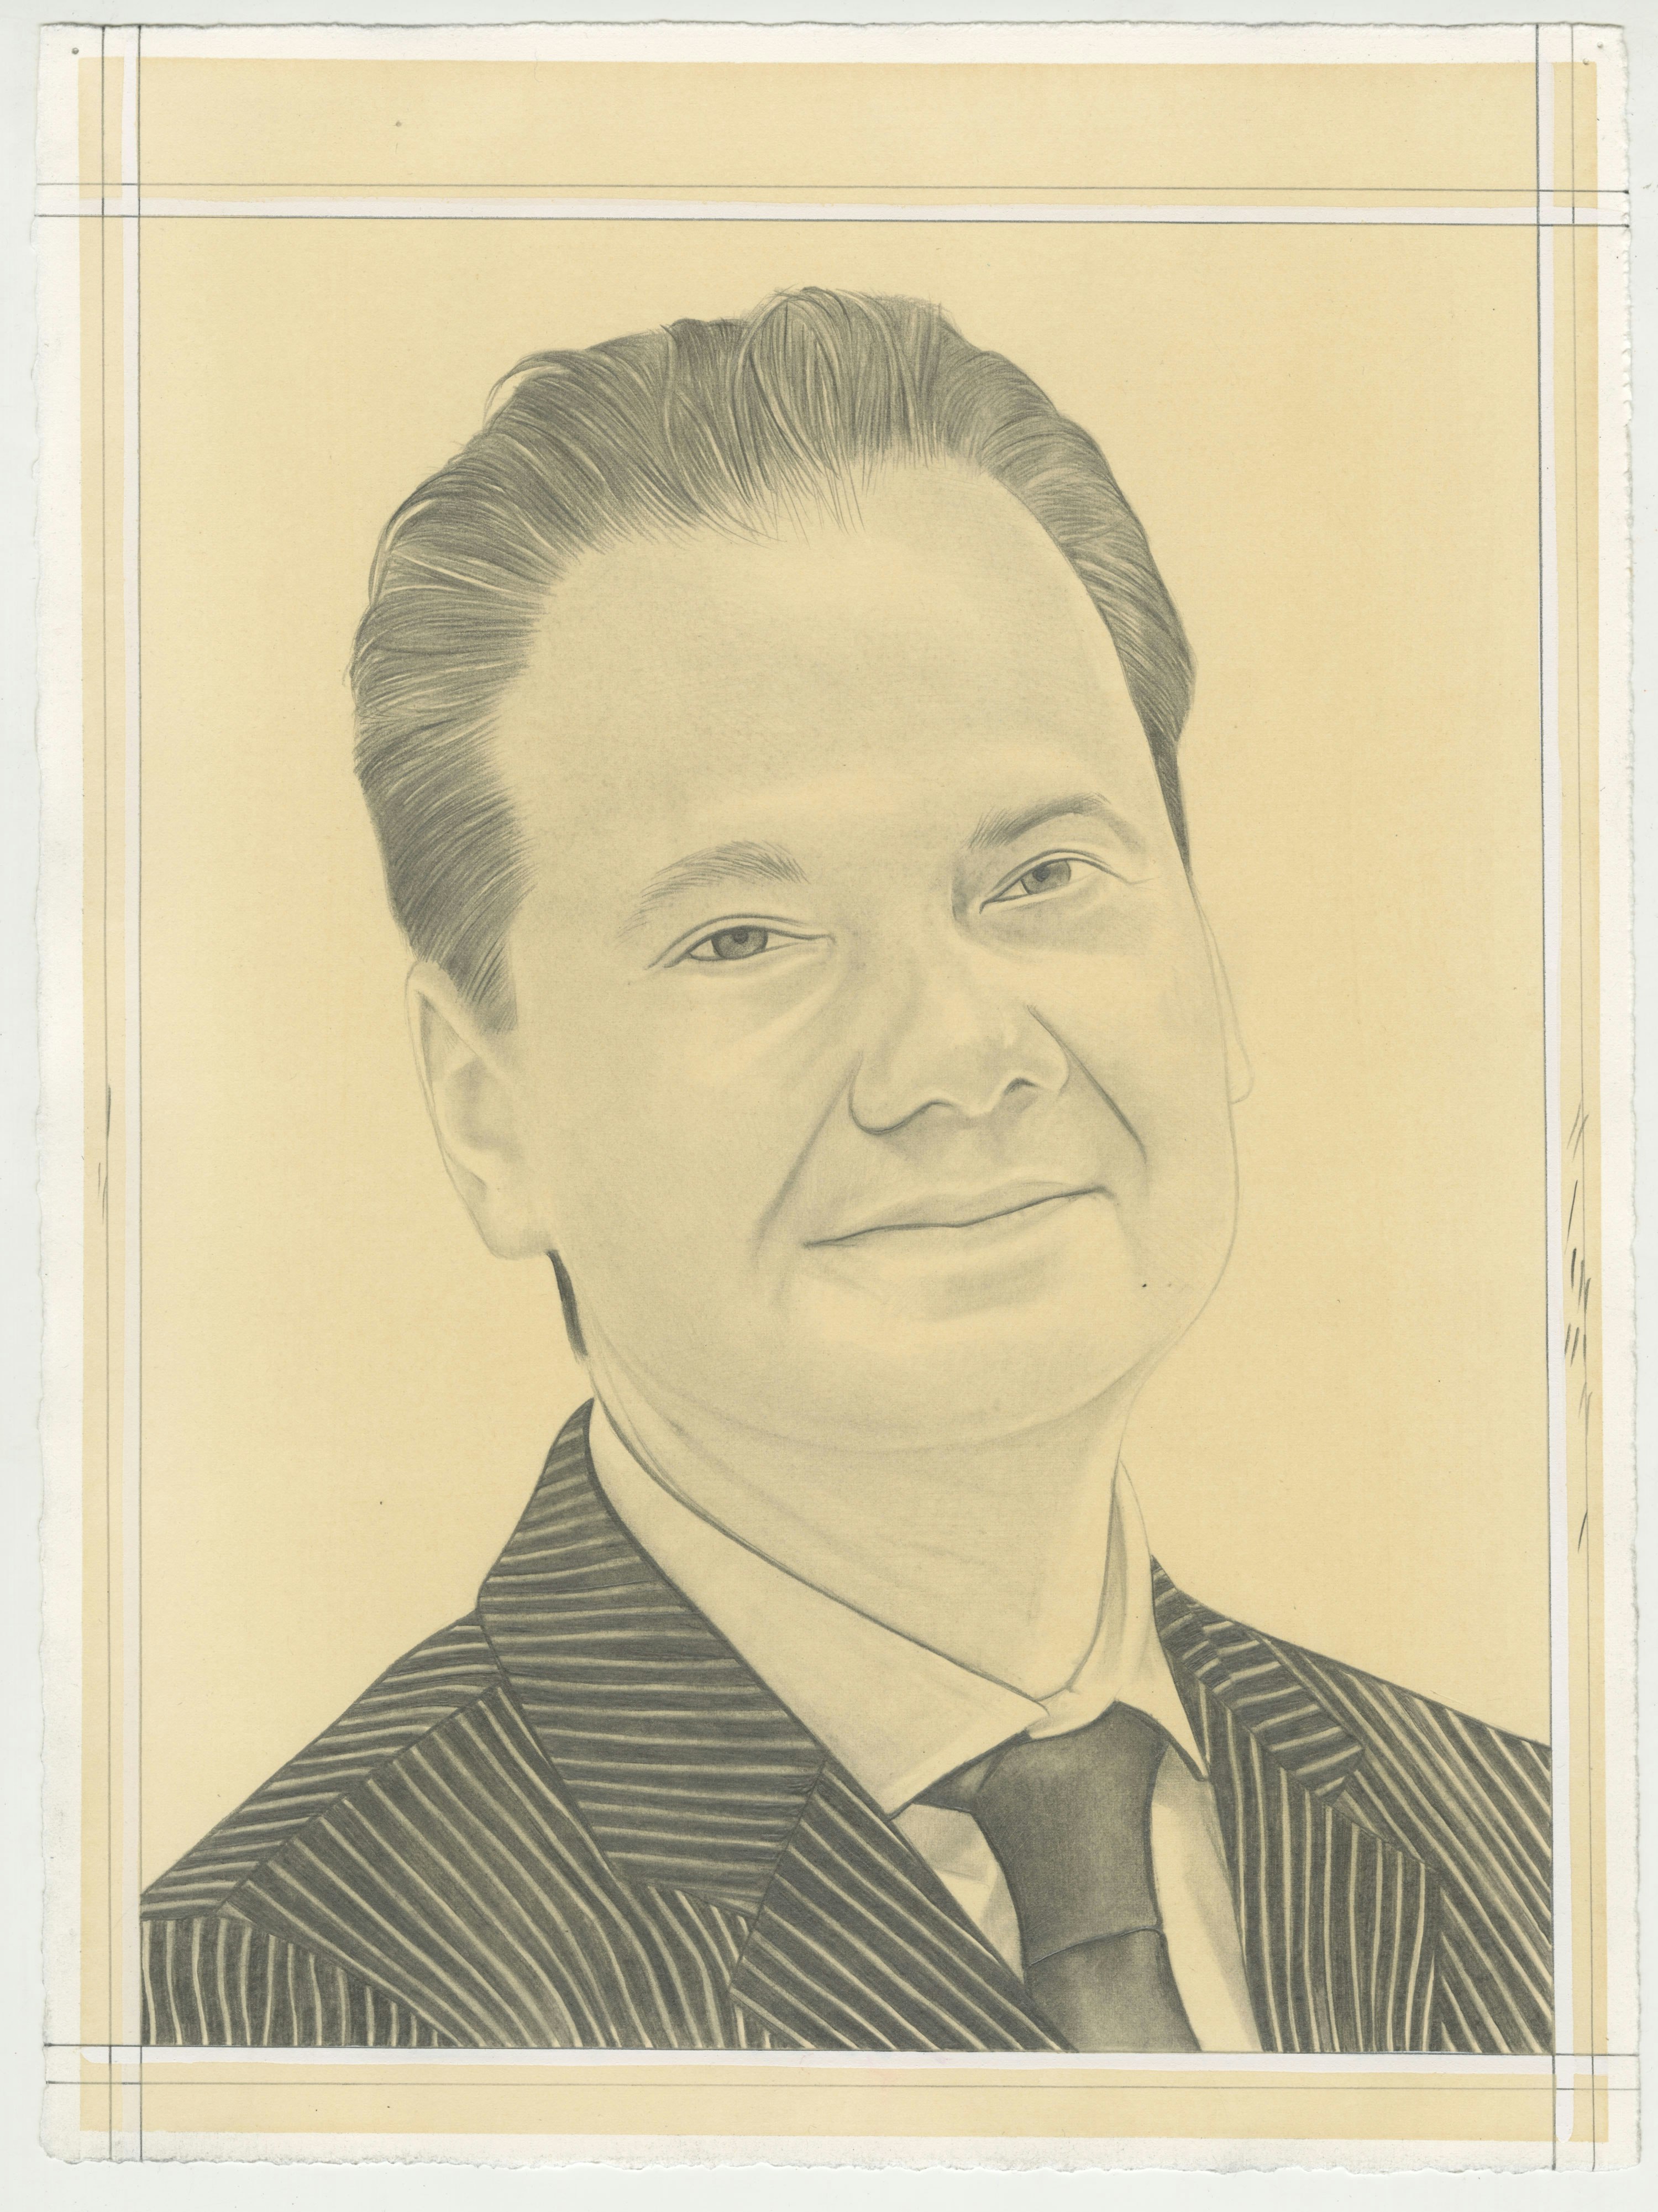 Portrait of Max Hollein, pencil on paper by Phong H. Bui.